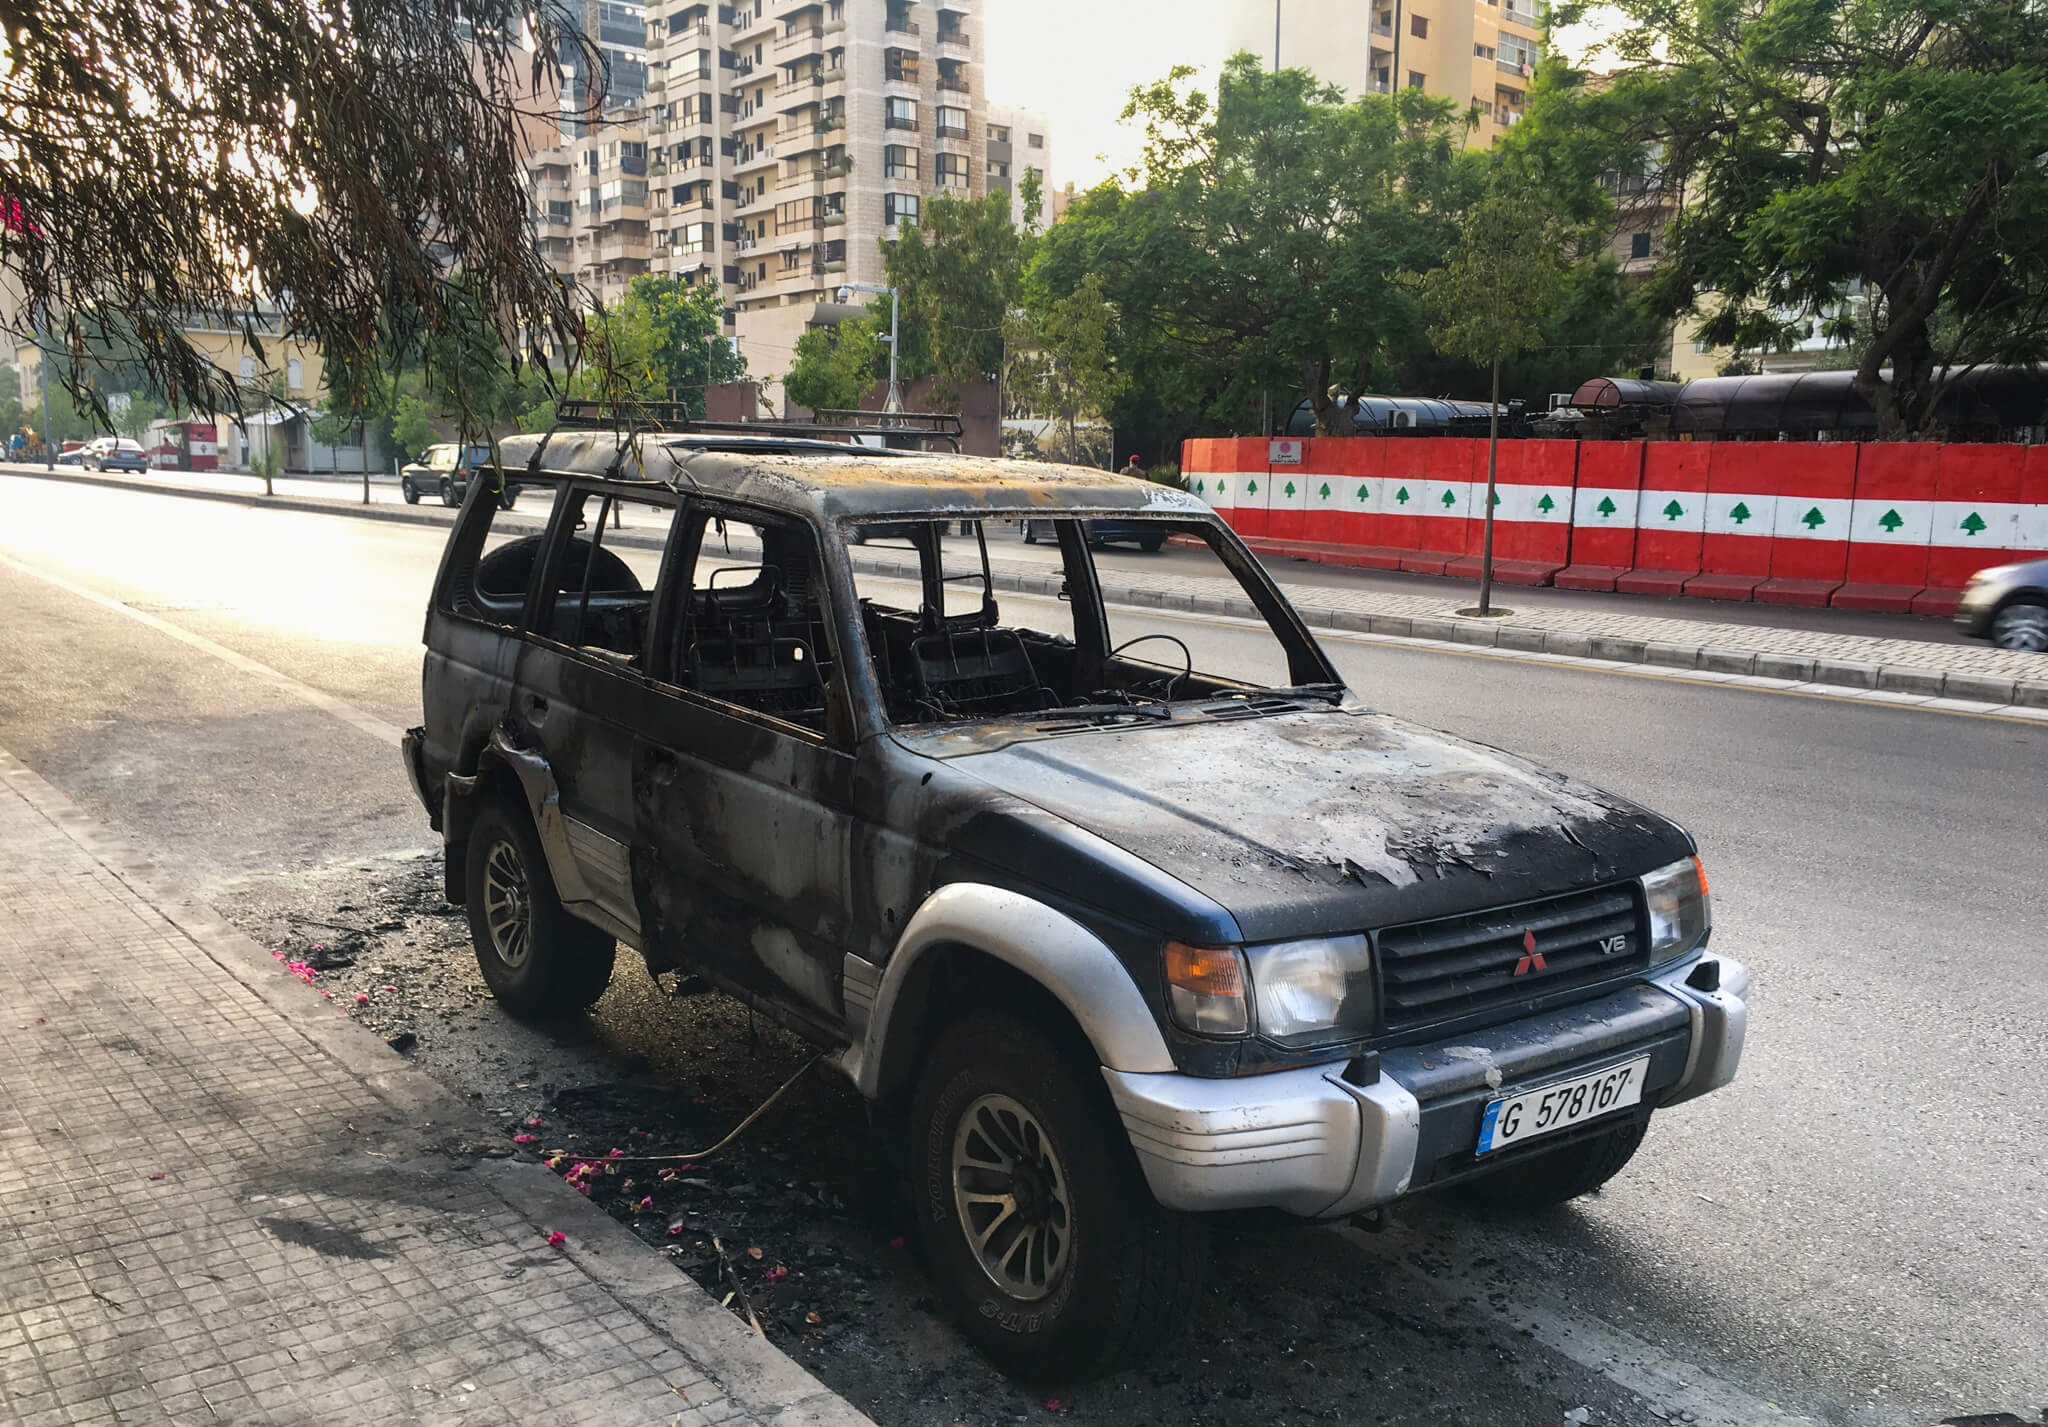 A burned out car on the edge of a road in Beirut.